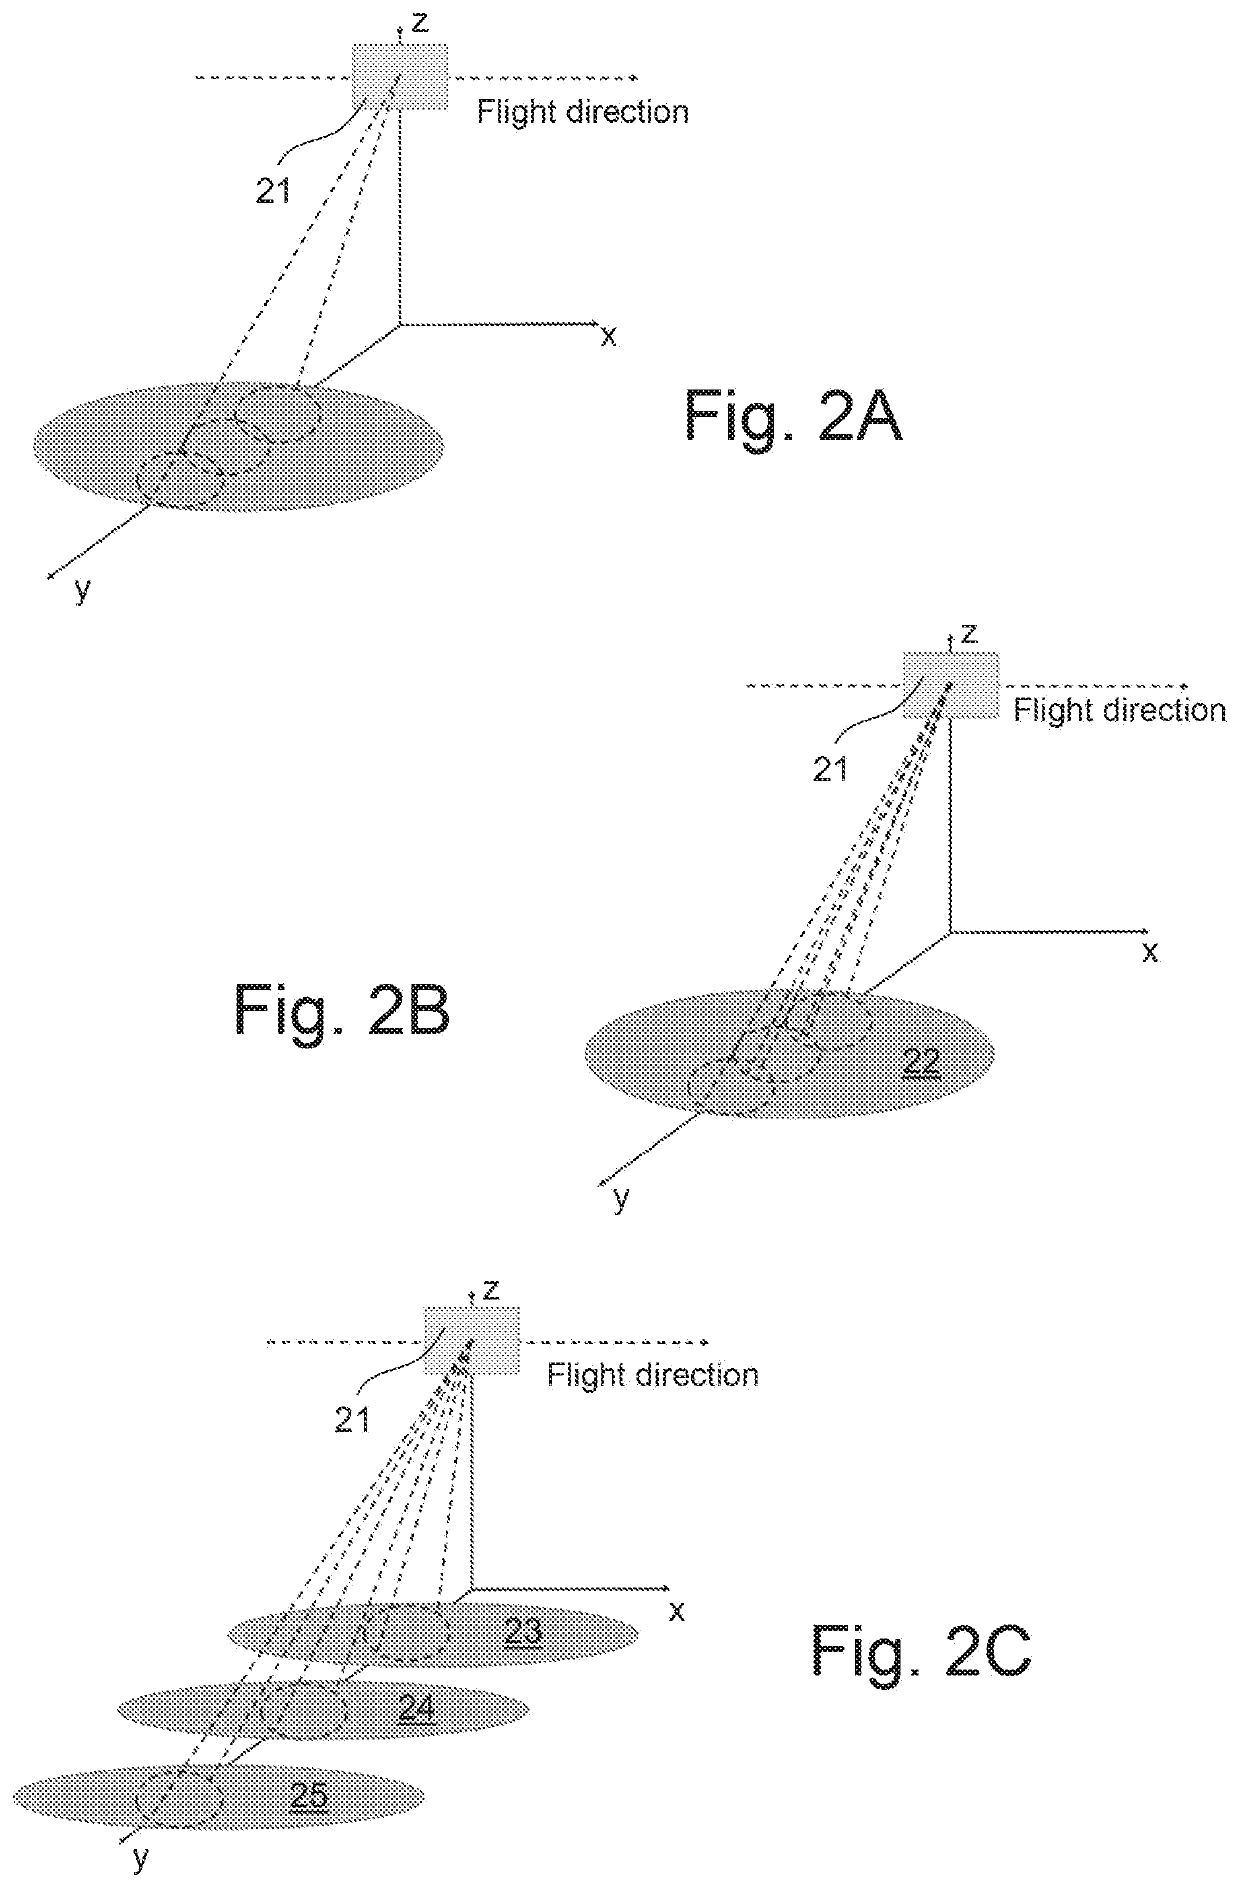 Method for Performing SAR Acquisitions with Enhanced Azimuth Resolution